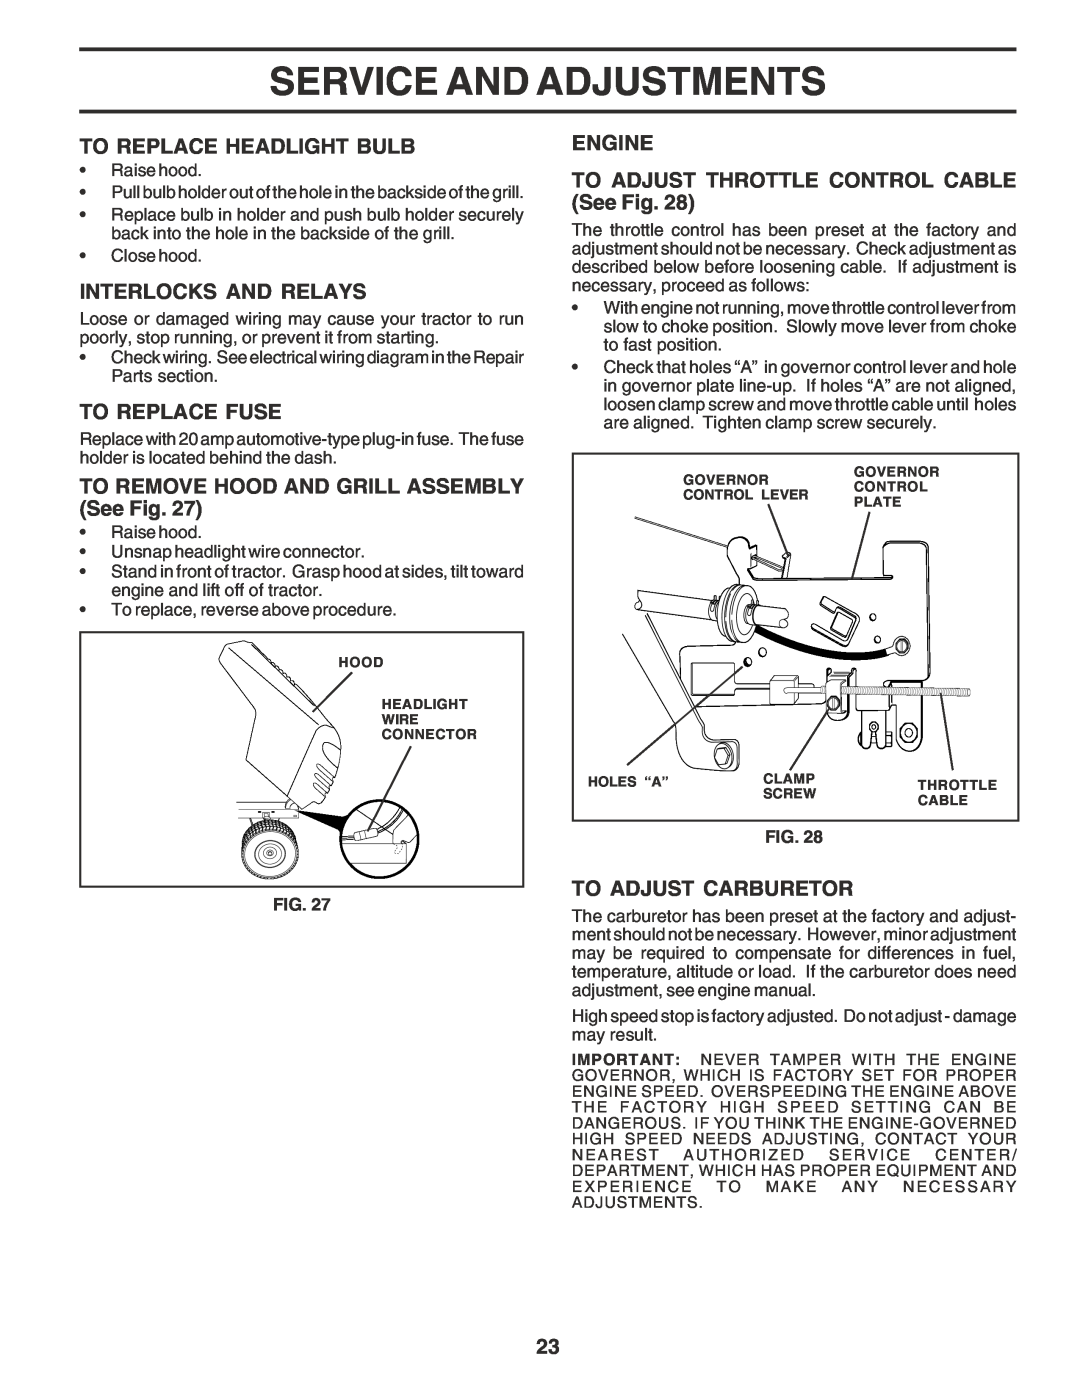 Weed Eater WE1538A manual To Replace Headlight Bulb, Interlocks And Relays, To Replace Fuse, To Adjust Carburetor 